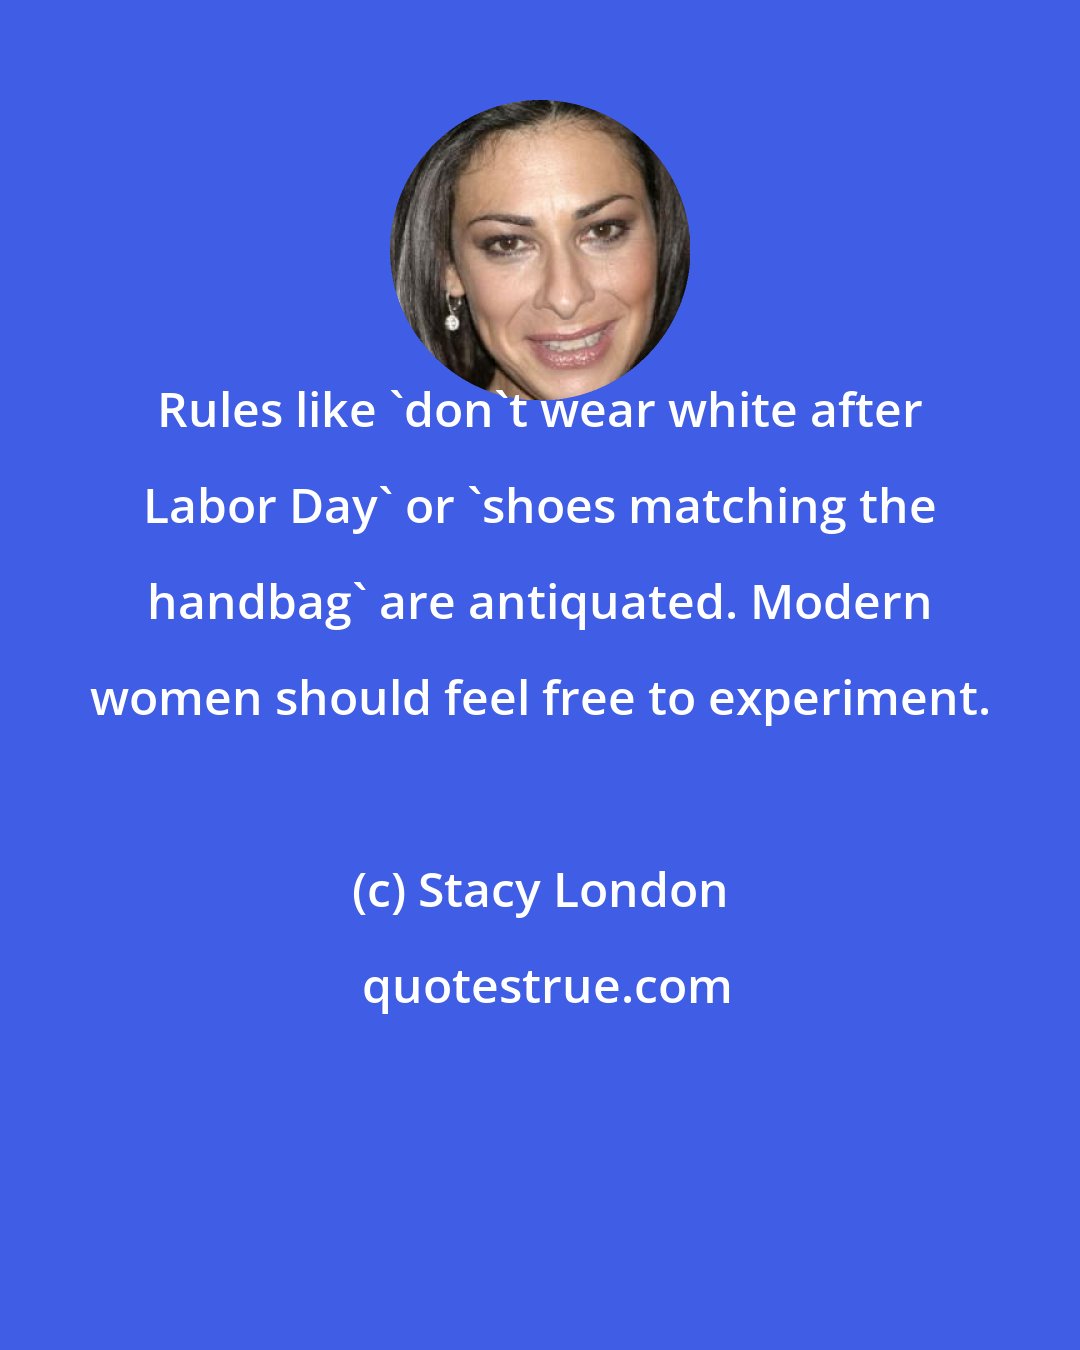 Stacy London: Rules like 'don't wear white after Labor Day' or 'shoes matching the handbag' are antiquated. Modern women should feel free to experiment.